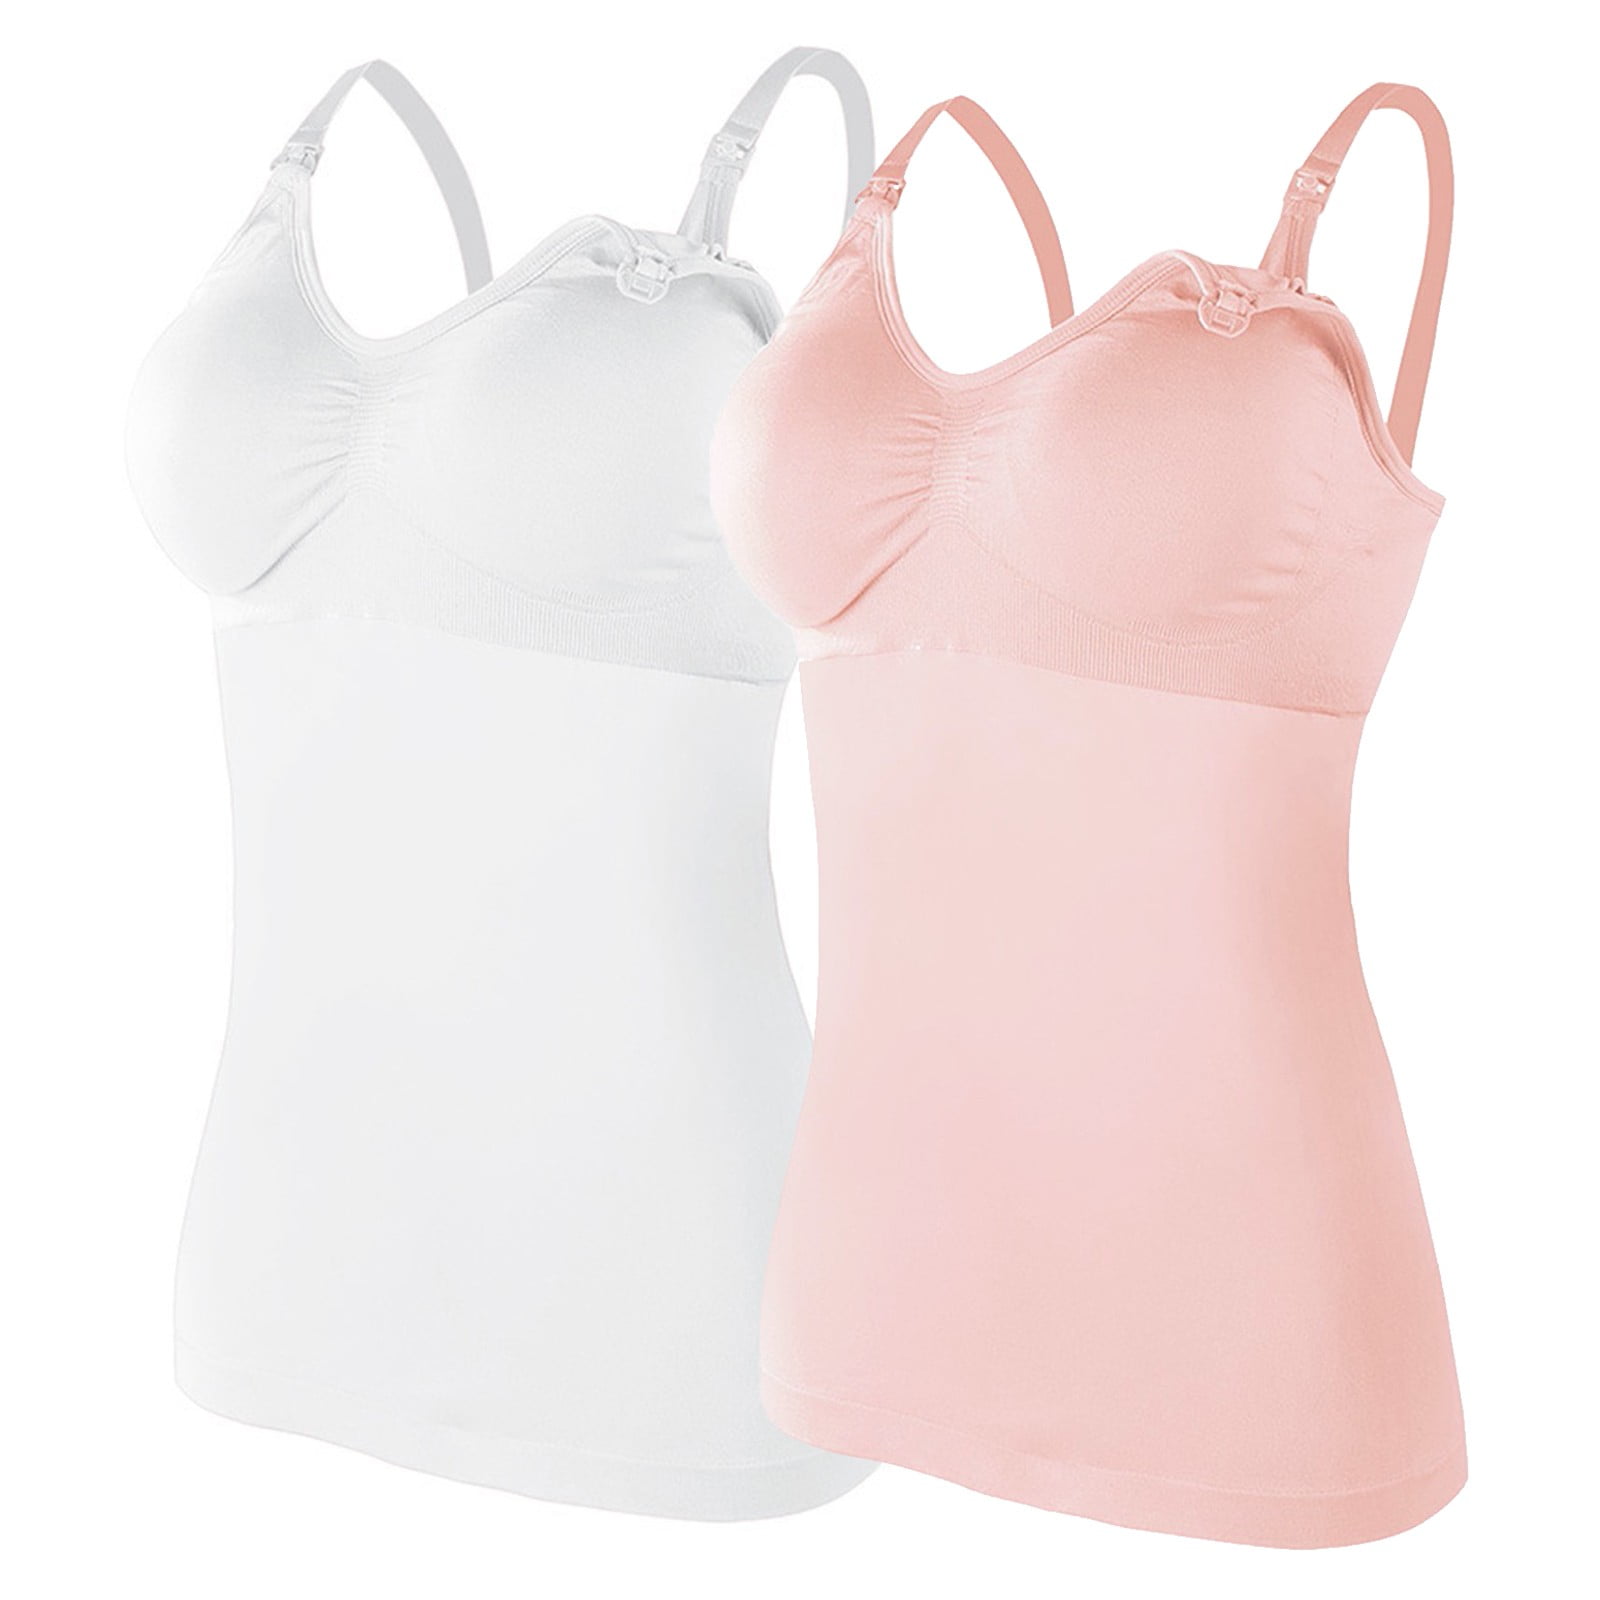 Womens Nursed Tank Tops Built In Bra Top For Breastfeeding Maternity  Camisole Brasieres 2PC With 4PC Pads 